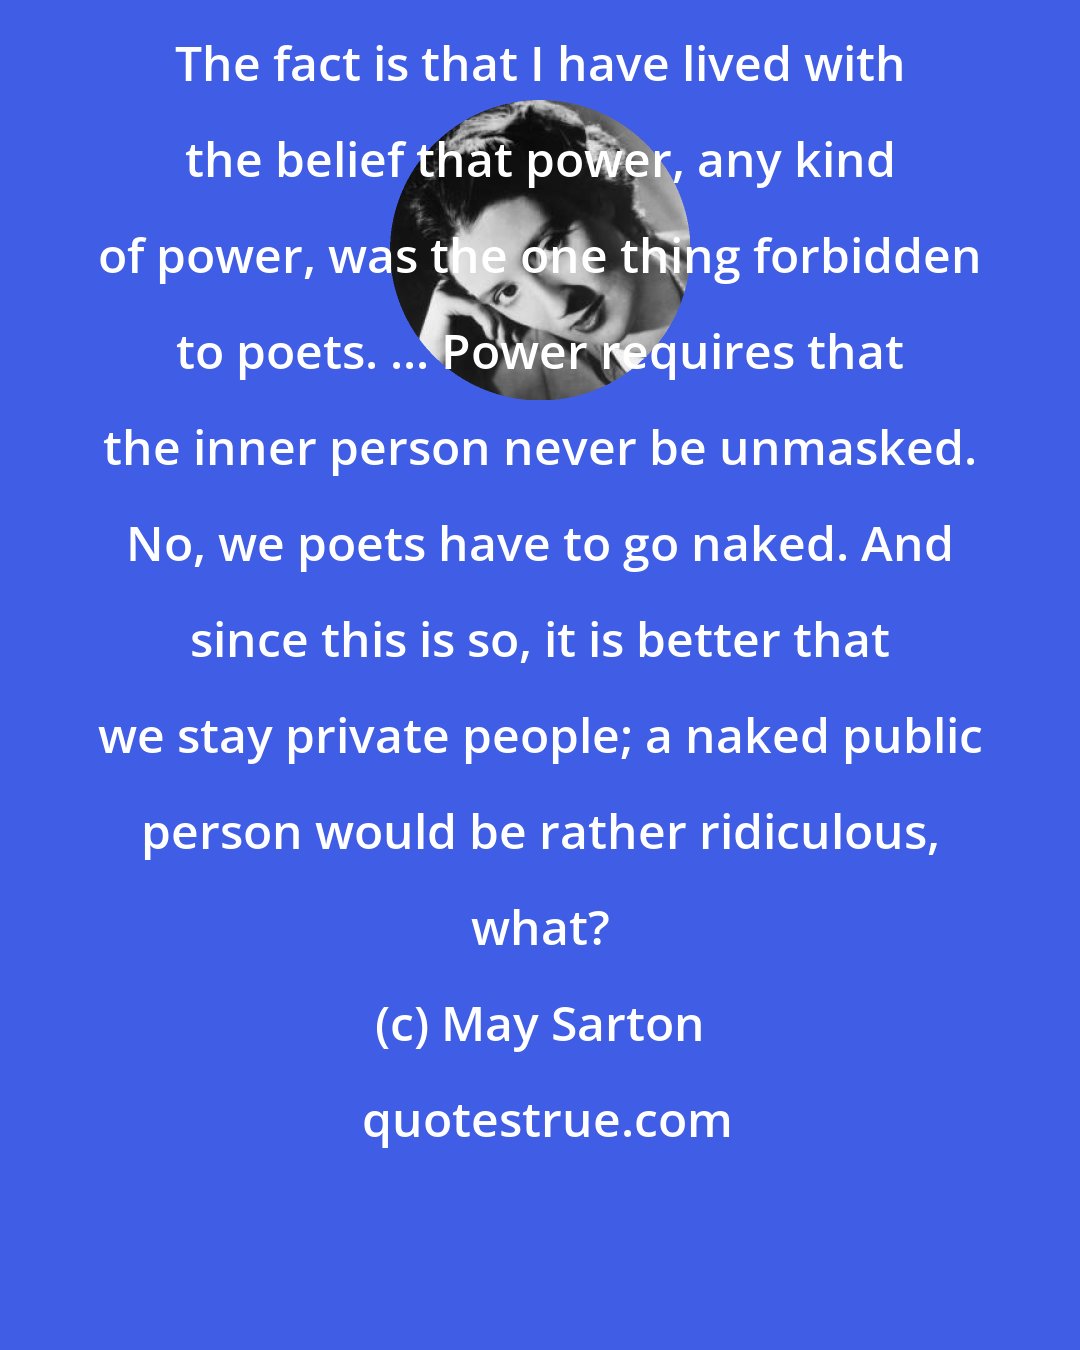 May Sarton: The fact is that I have lived with the belief that power, any kind of power, was the one thing forbidden to poets. ... Power requires that the inner person never be unmasked. No, we poets have to go naked. And since this is so, it is better that we stay private people; a naked public person would be rather ridiculous, what?